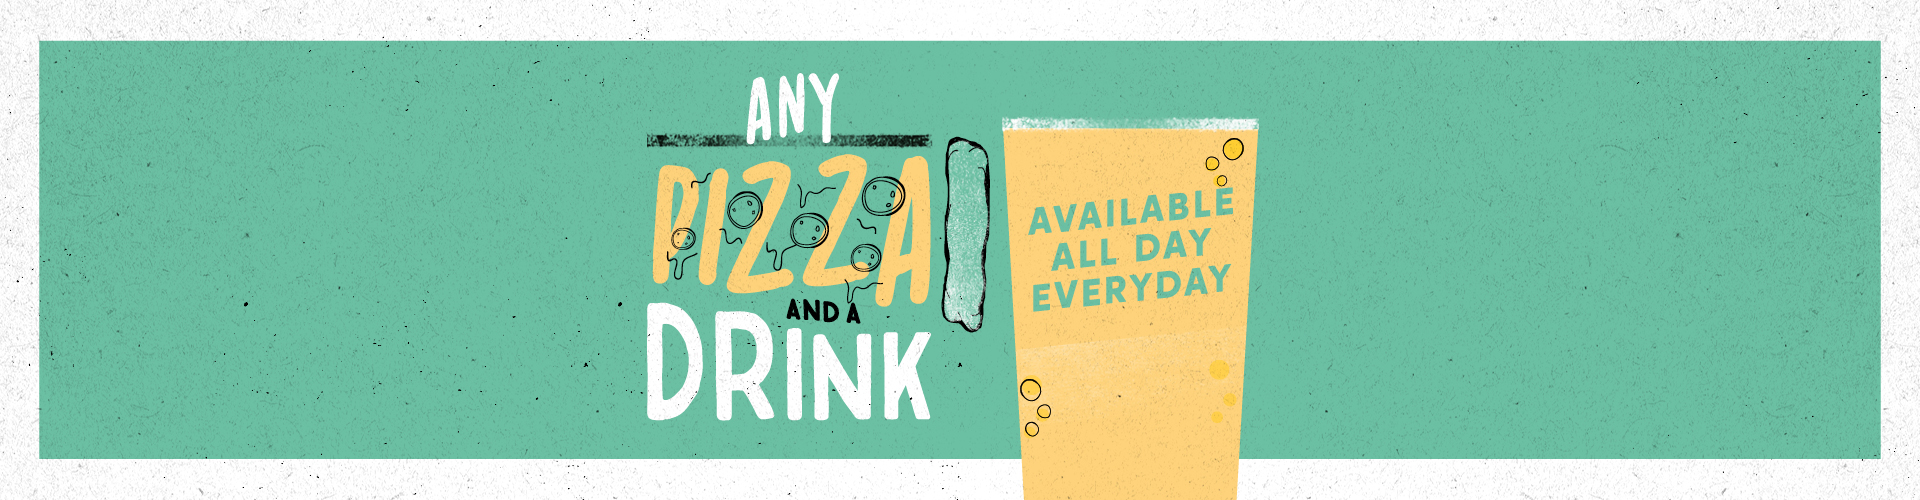 Any pizza and a drink. Available all day, everyday